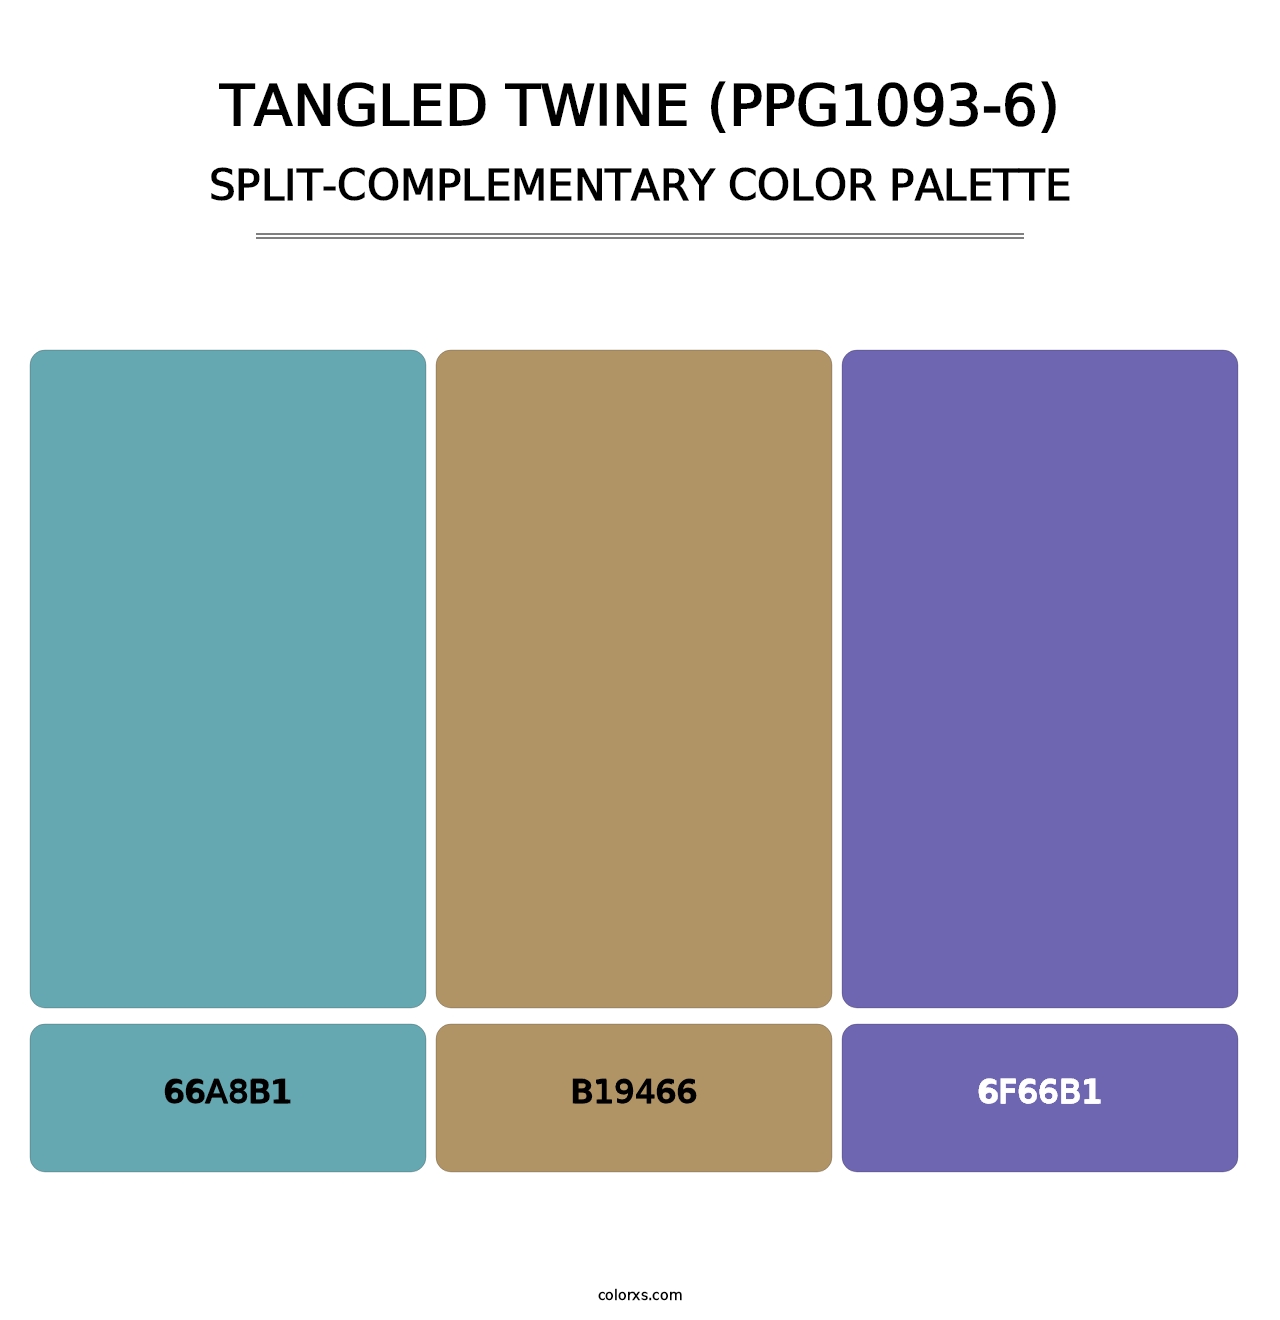 Tangled Twine (PPG1093-6) - Split-Complementary Color Palette